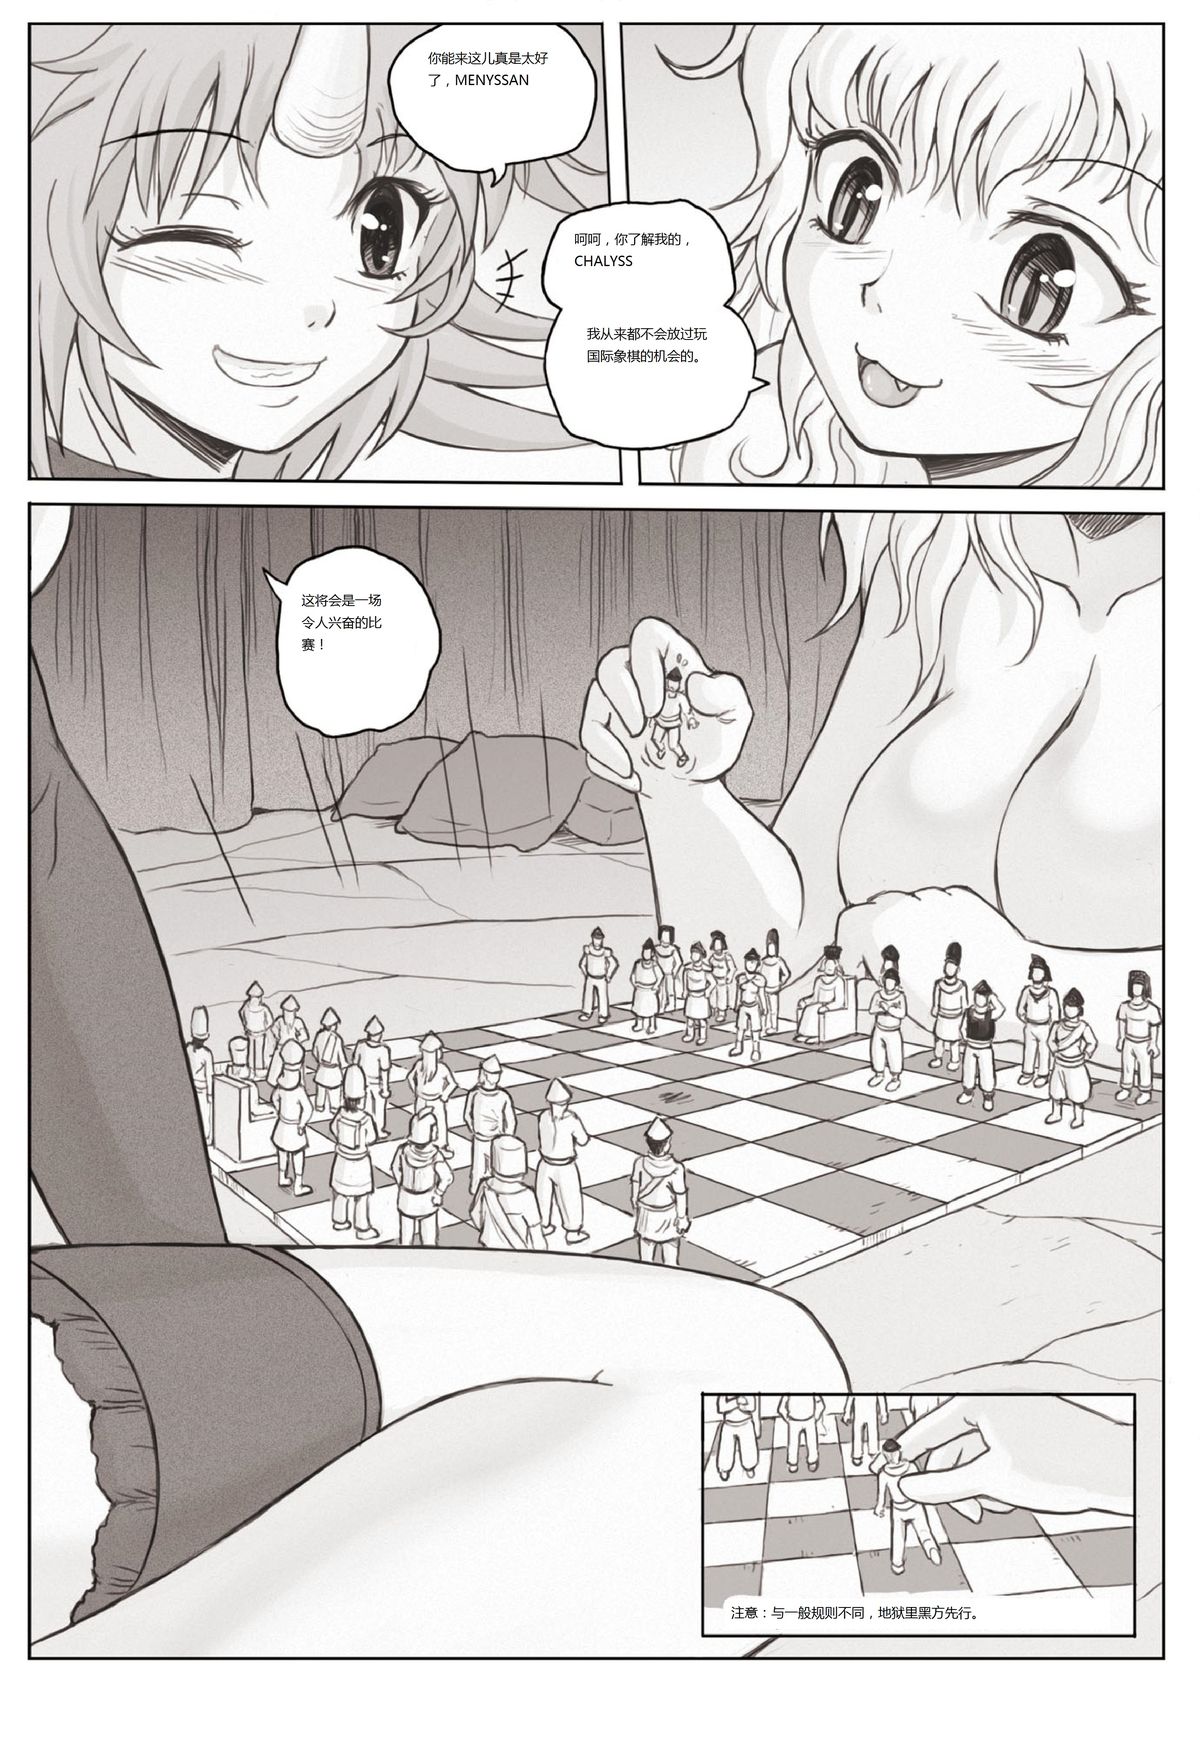 [Karbo] Check and mate [林檎个人汉化]